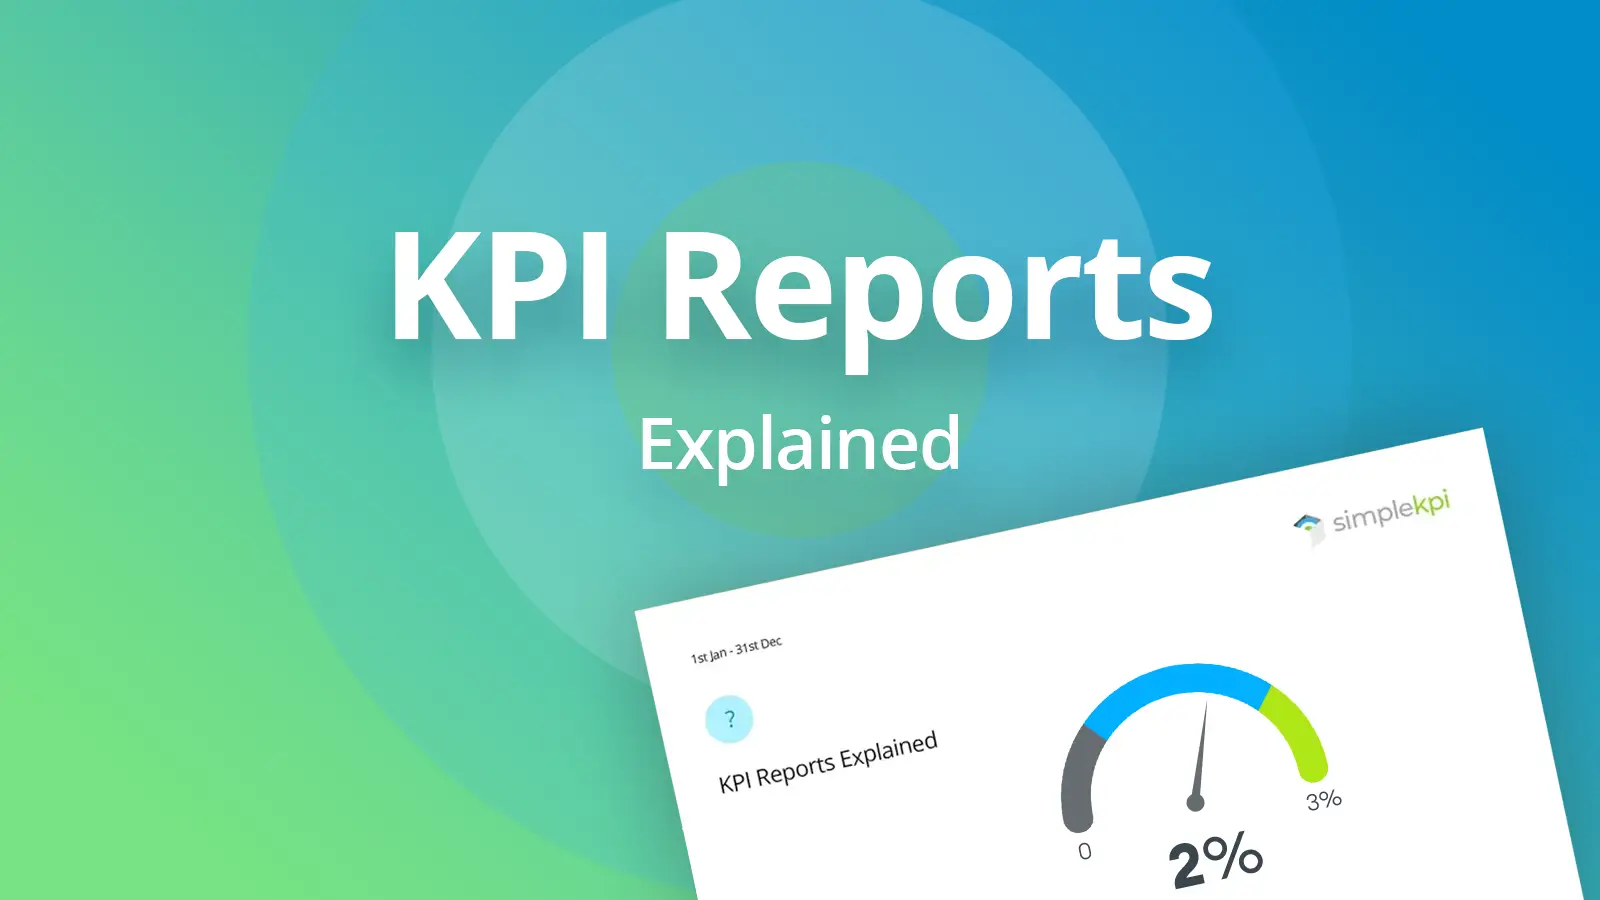 A KPI Report lying on a wooden table with a cup of coffee